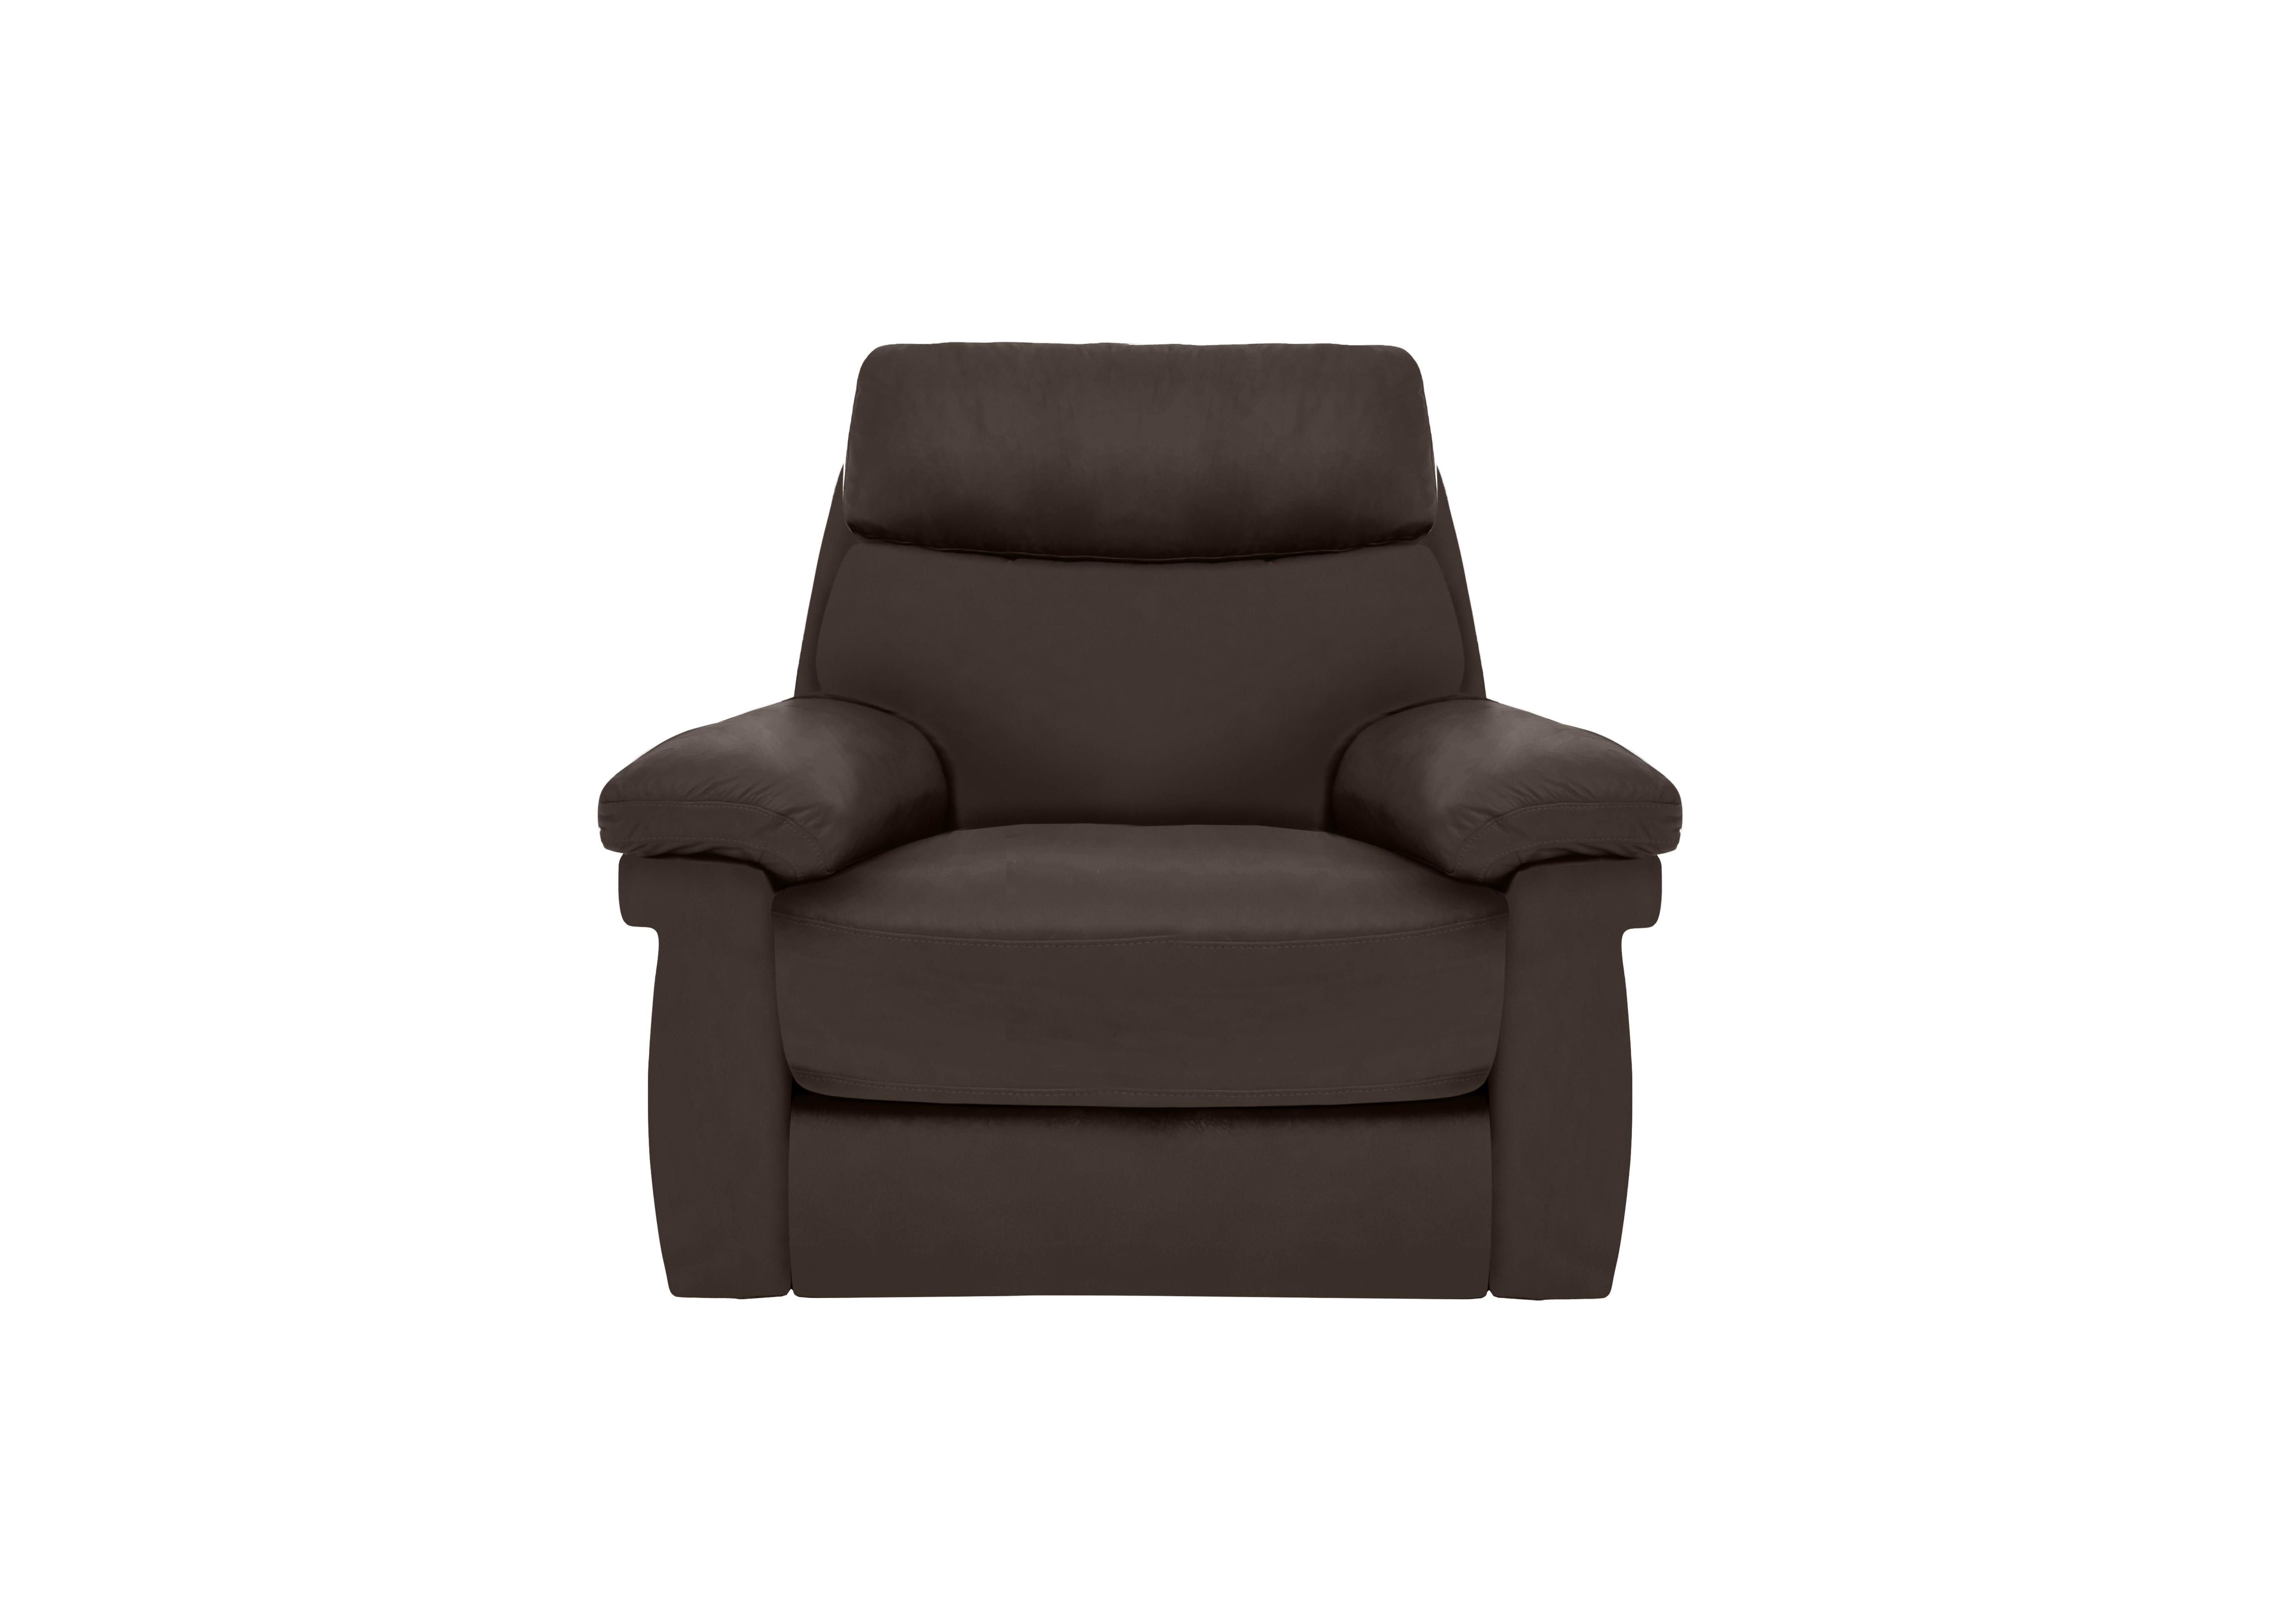 Serene Leather Power Recliner Chair with Power Headrest and Power Lumbar in Bx-037c Walnut on Furniture Village